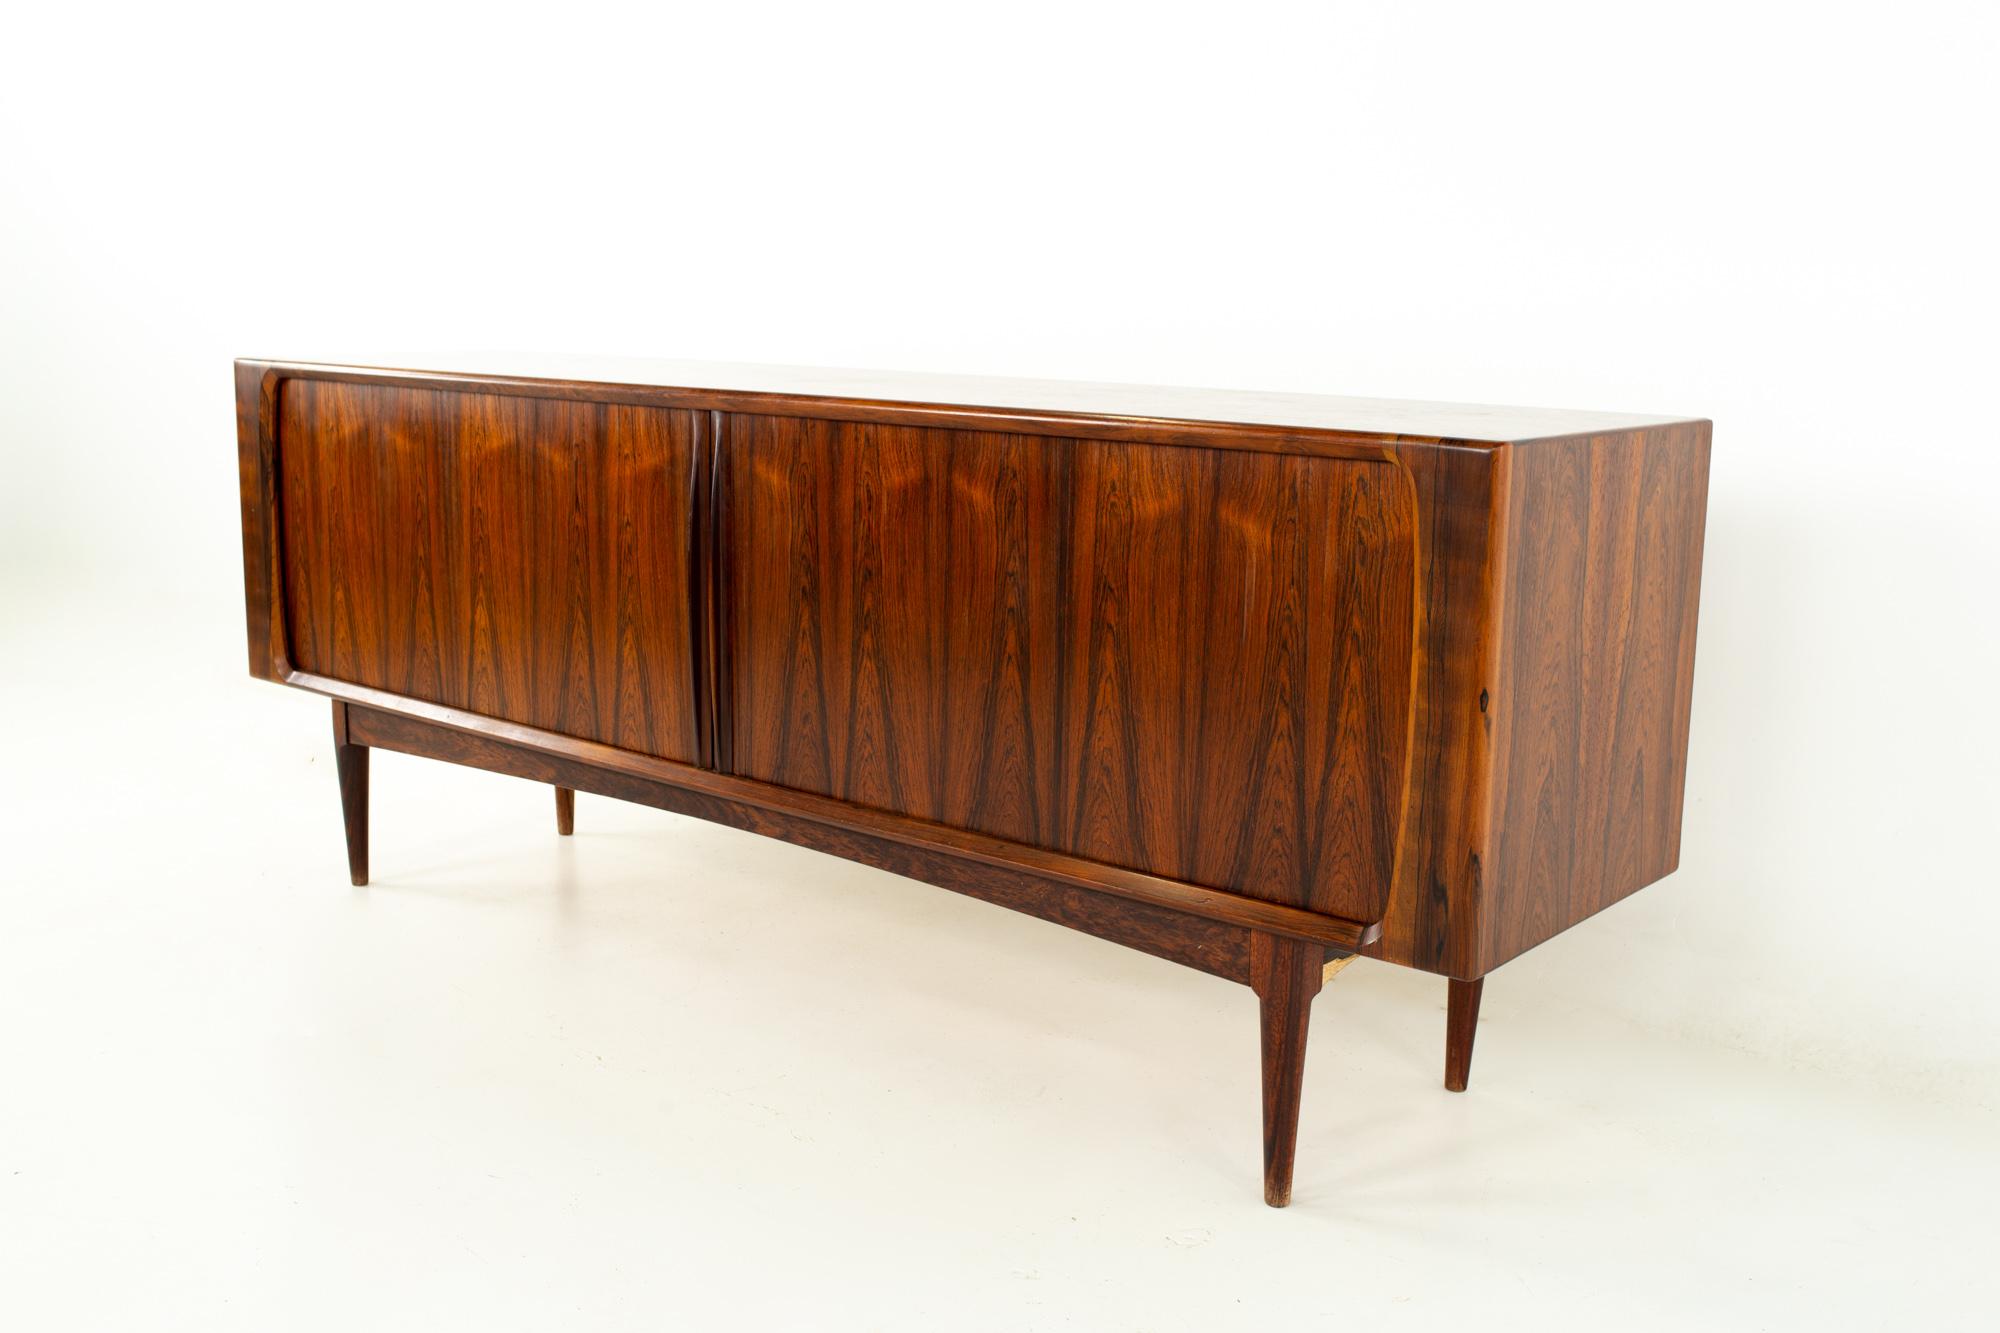 Bernhardt Pedersen midcentury rosewood tambour door credenza
Credenza measures: 82.75 wide x 19.5 deep x 31.75 inches high

All pieces of furniture can be had in what we call restored vintage condition. That means the piece is restored upon